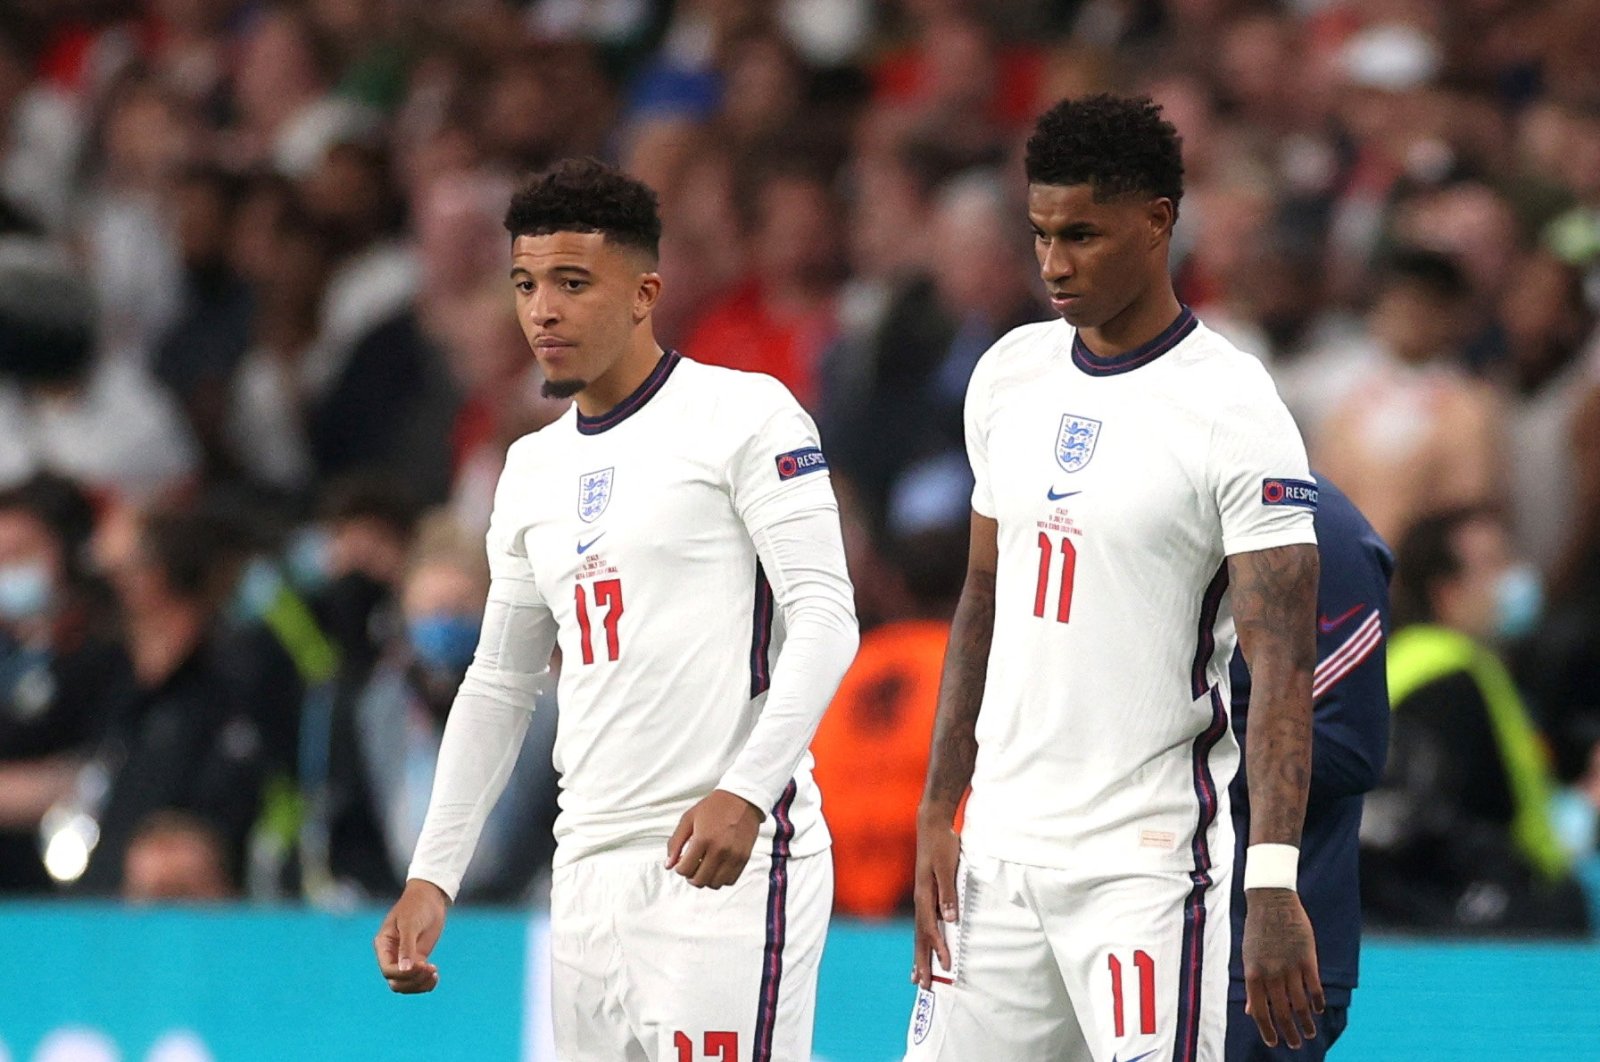 Marcus Rashford (L) and Jadon Sancho (R), seen here in a match in London, Britain, July 11, 2021, have been the victims of online racist abuse. (REUTERS PHOTO)